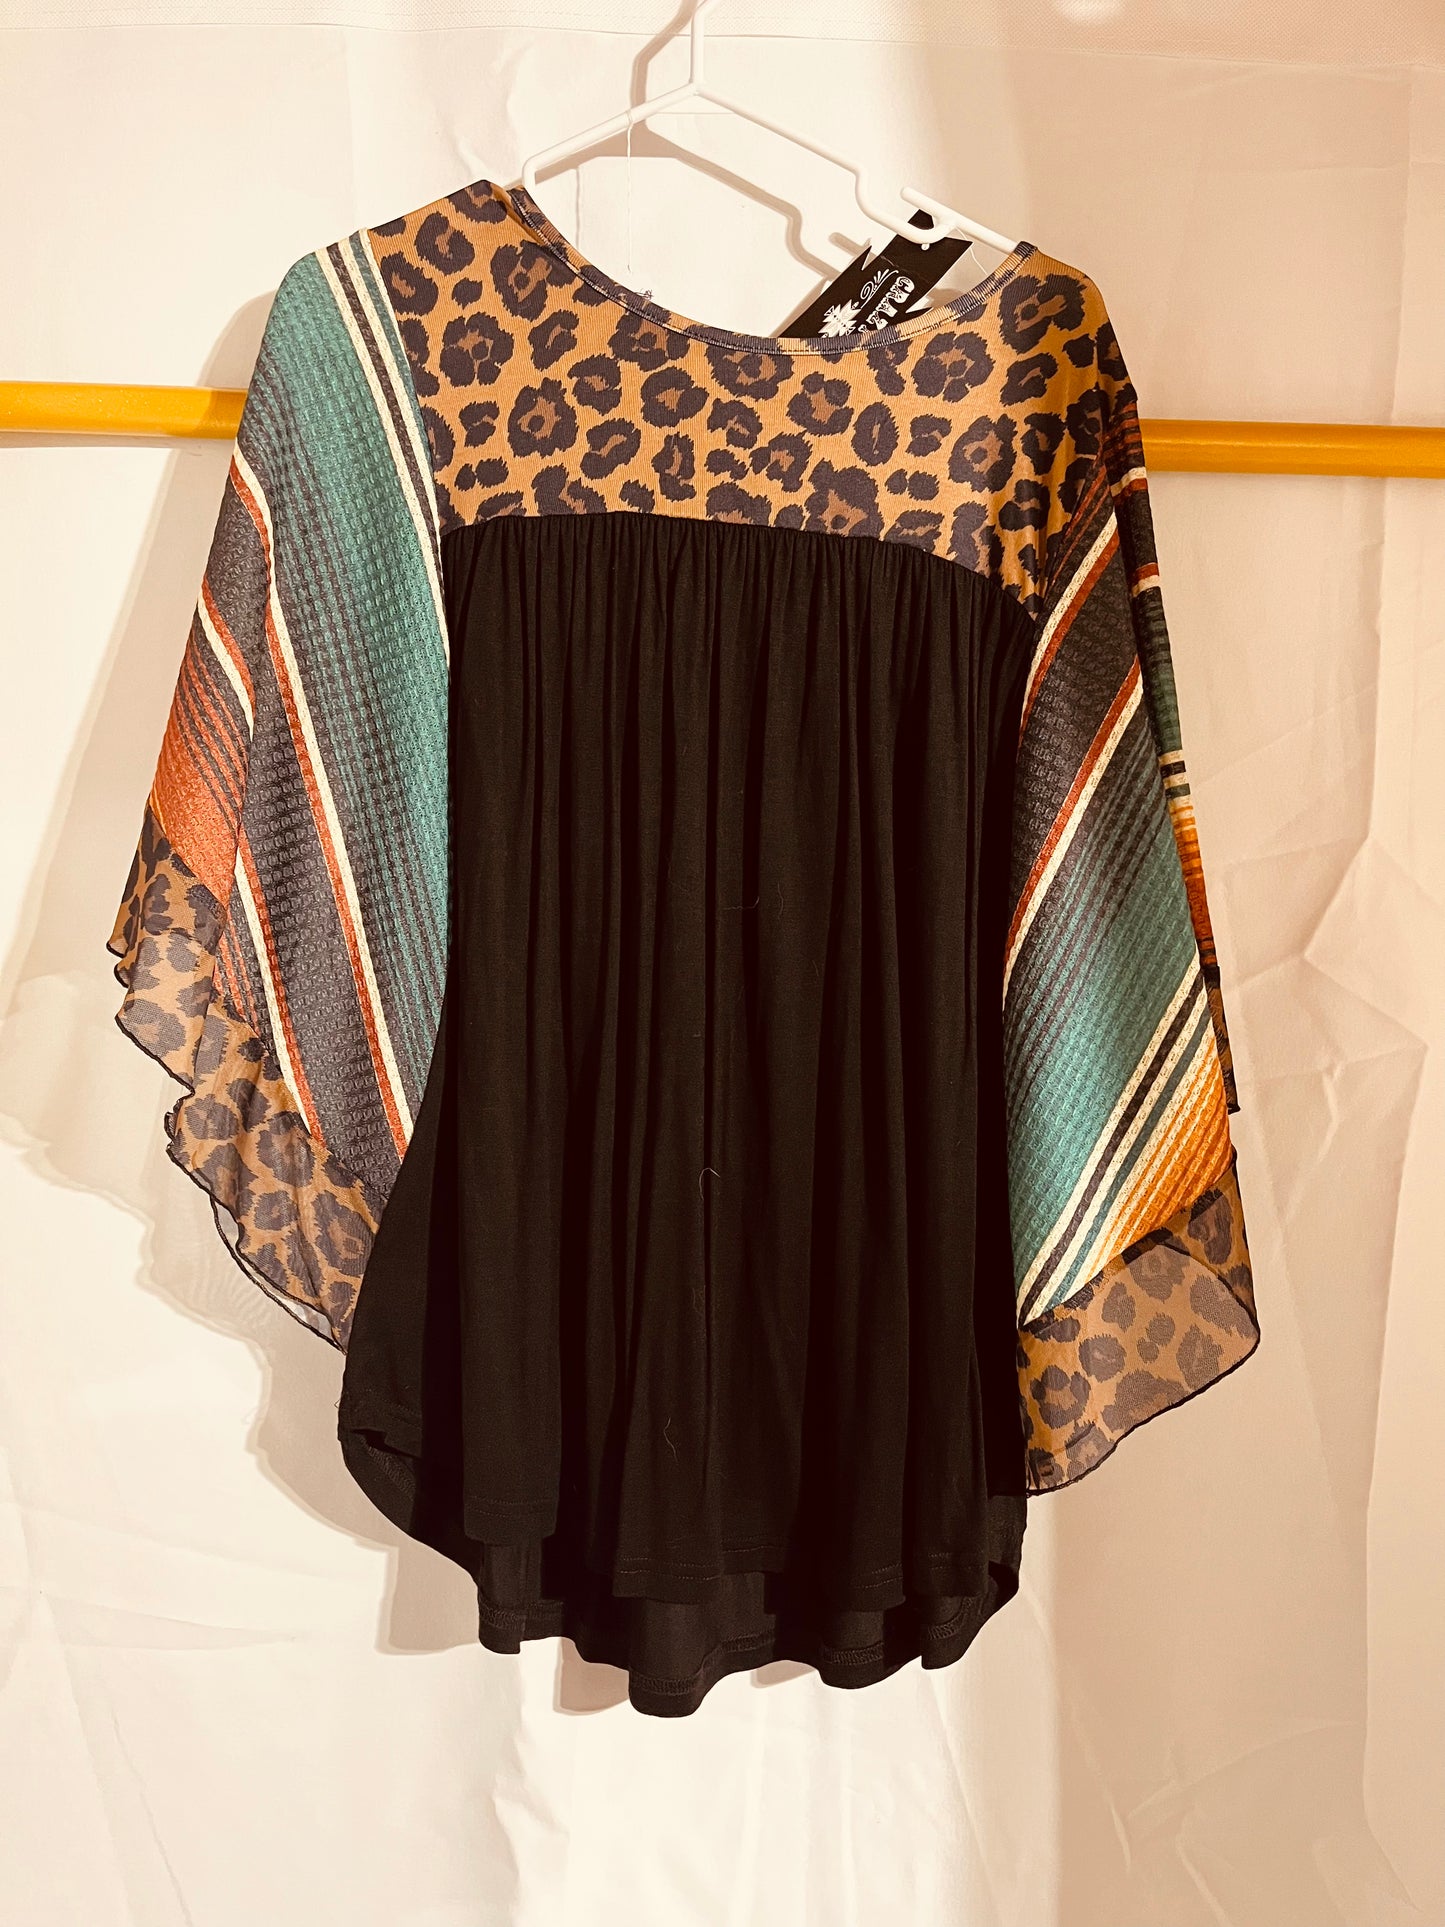 Cheetah Aztec blouse with flowy sleeves small unisex sizing roomy fit